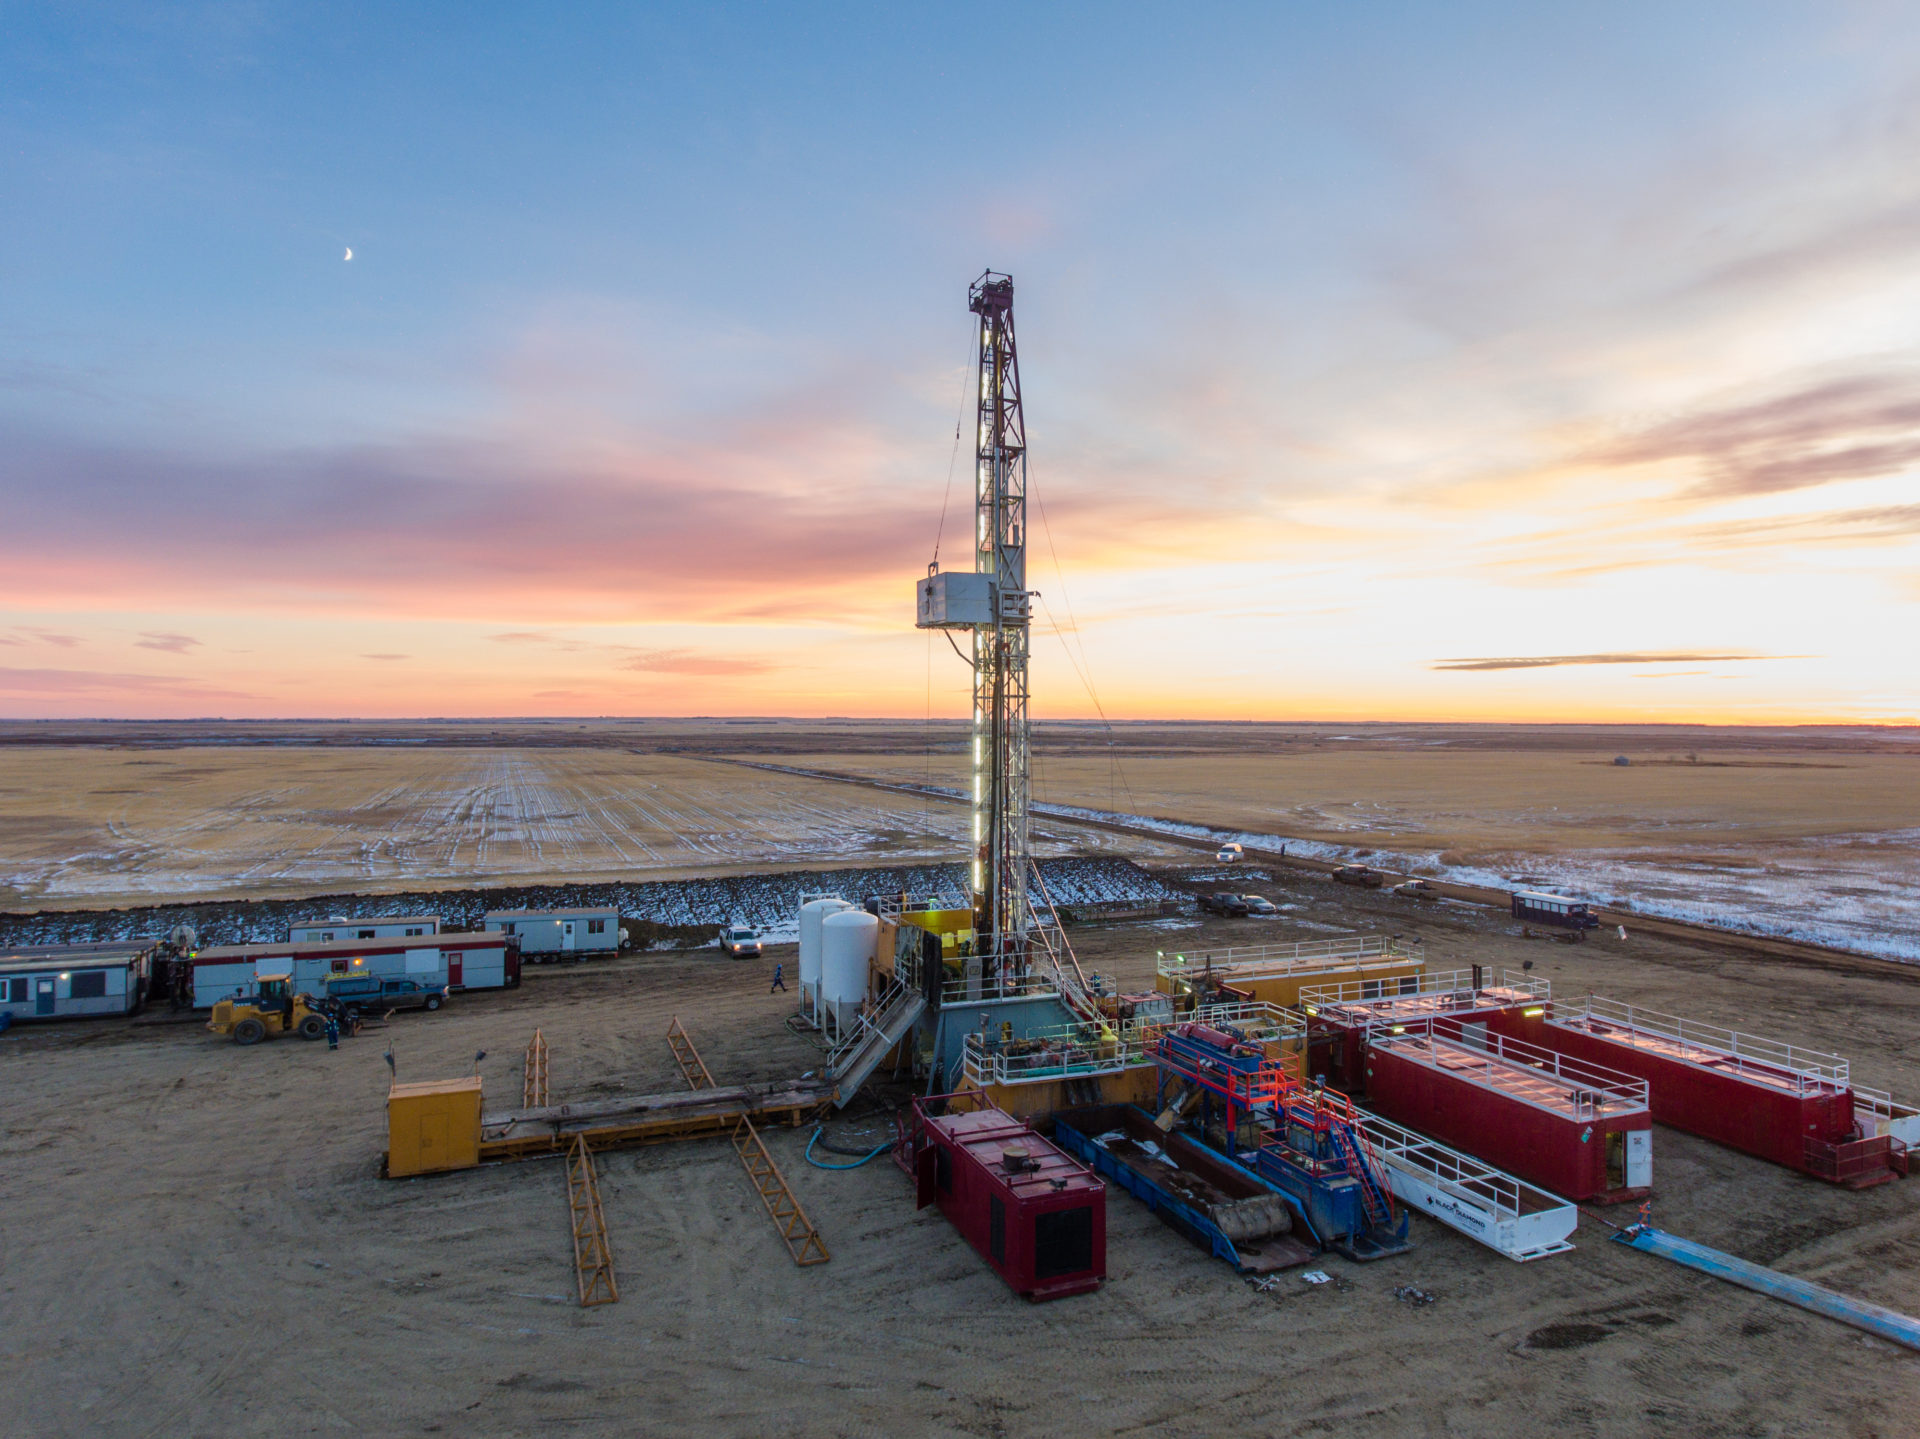 DEEP geothermal drill rig. In December 2018, DEEP drilled the province’s deepest well, more than 3,000 metres deep, to harvest hot water. Photo: DEEP Corp.